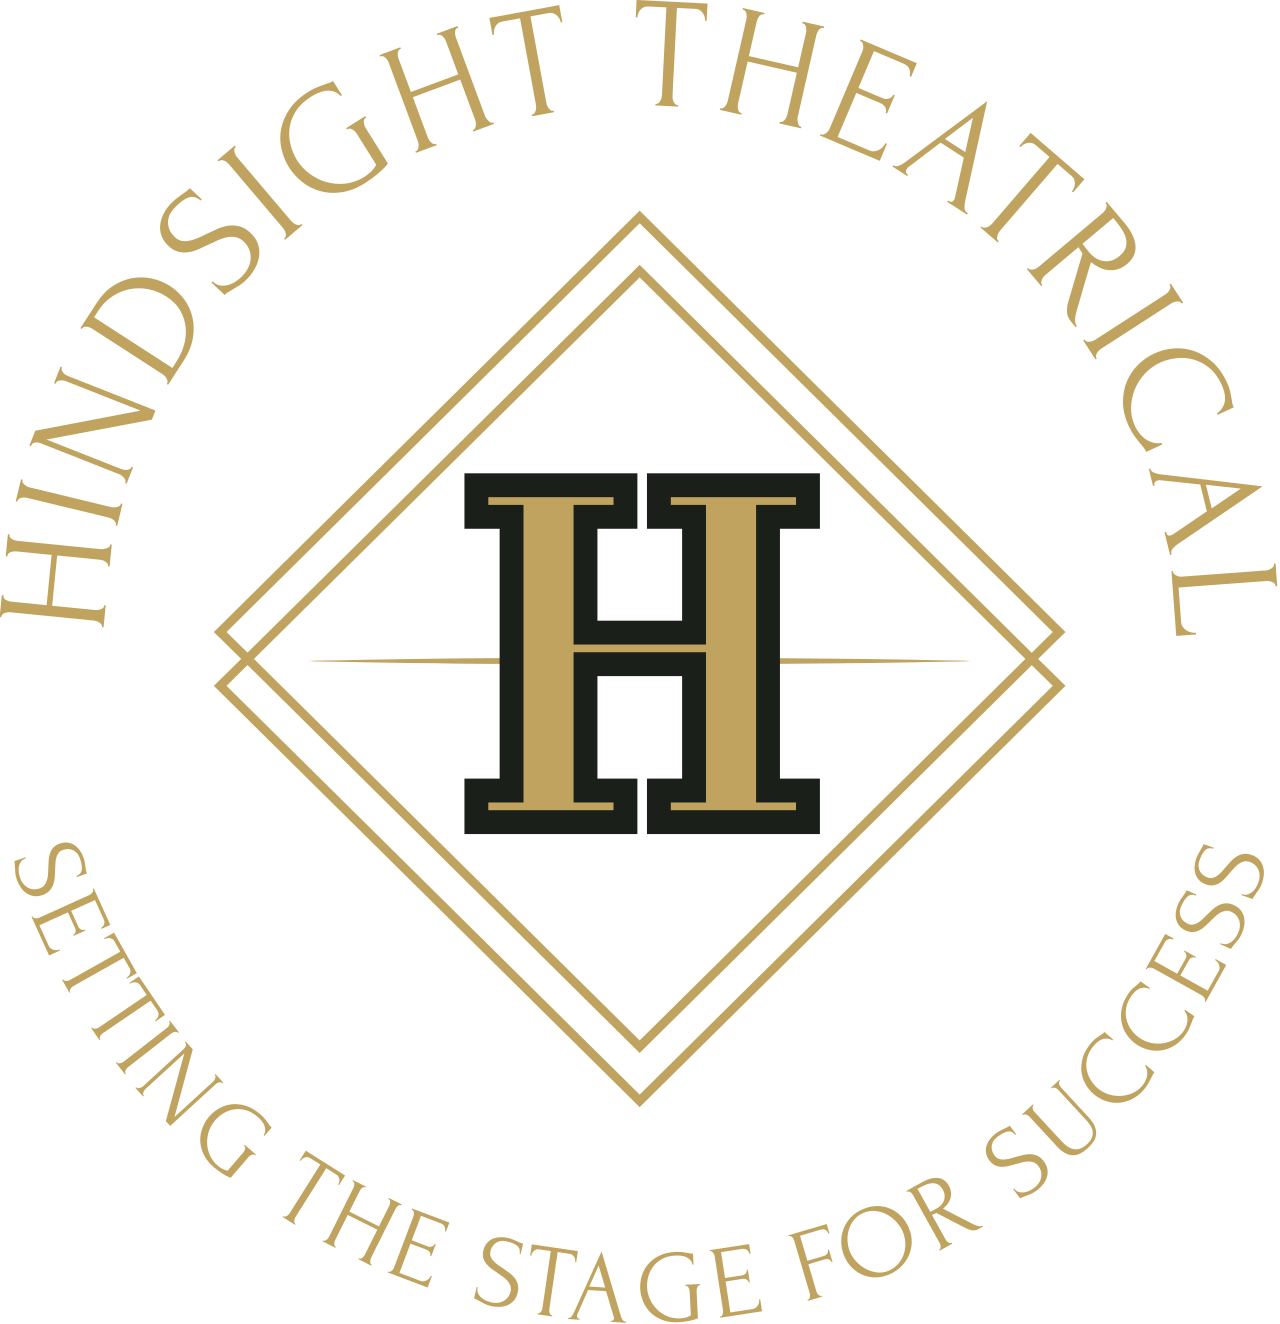 Hindsight Theatrical's logo